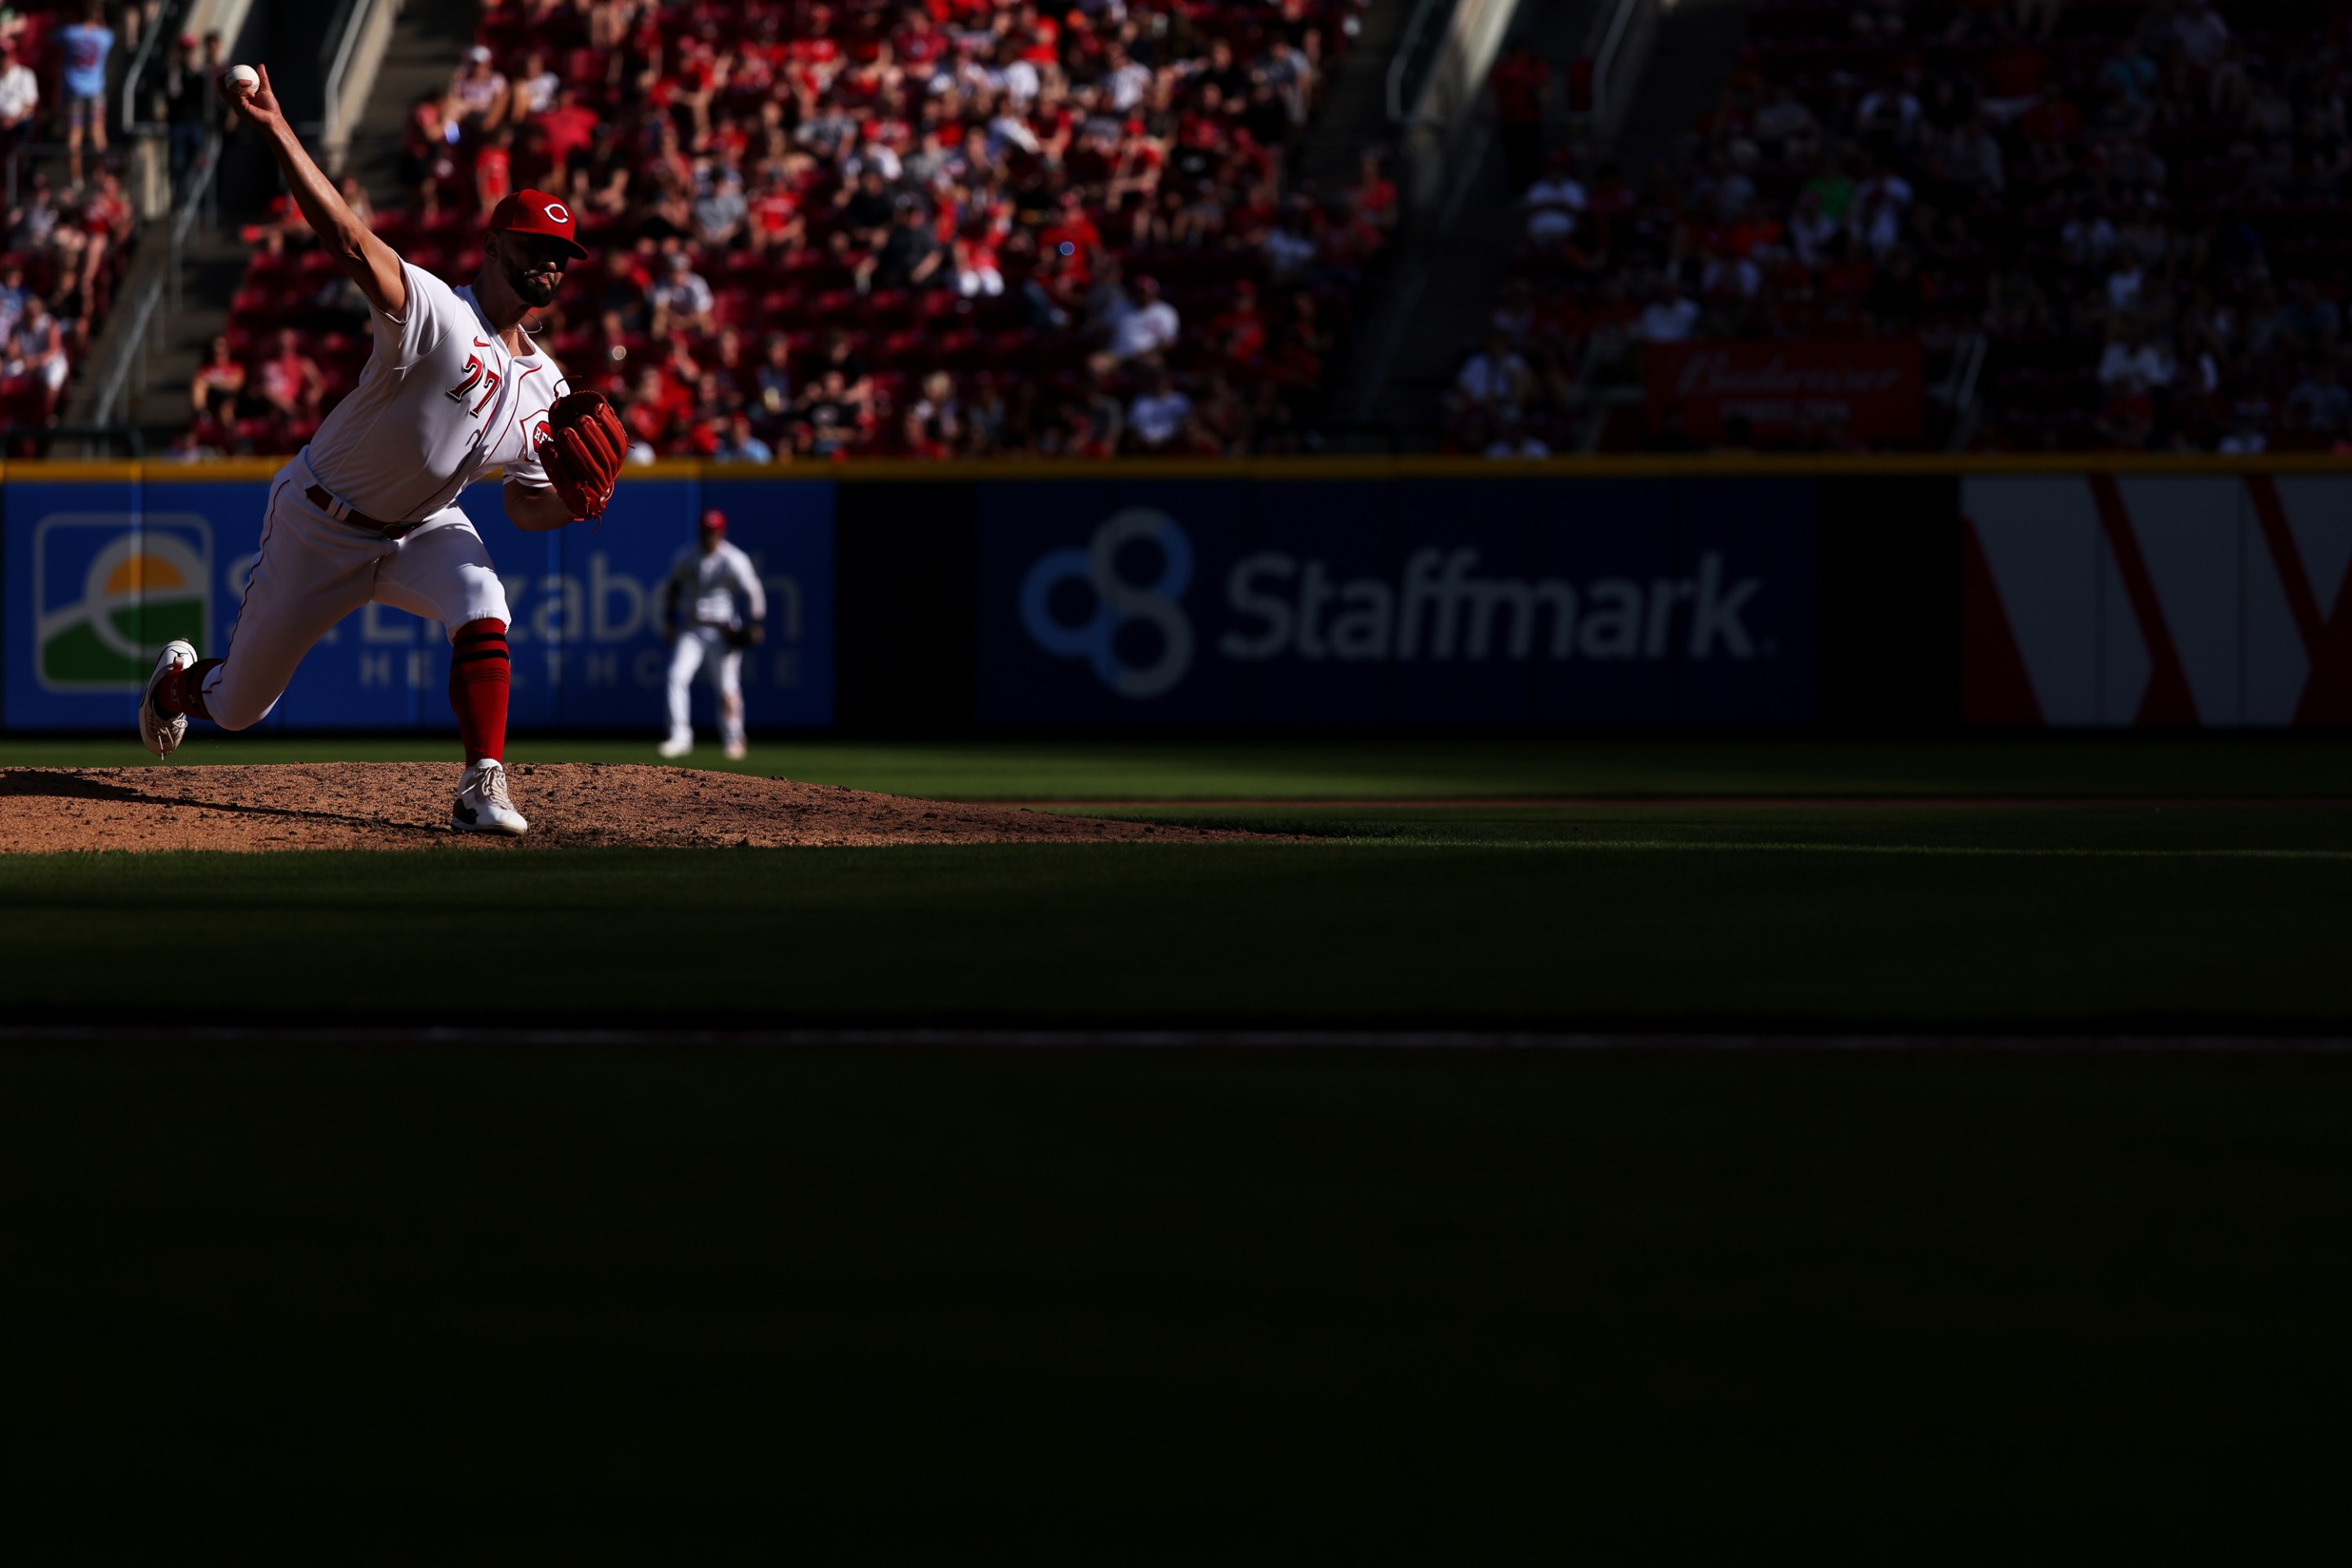 Reds reliever Art Warren pitches at home against the Cardinals.